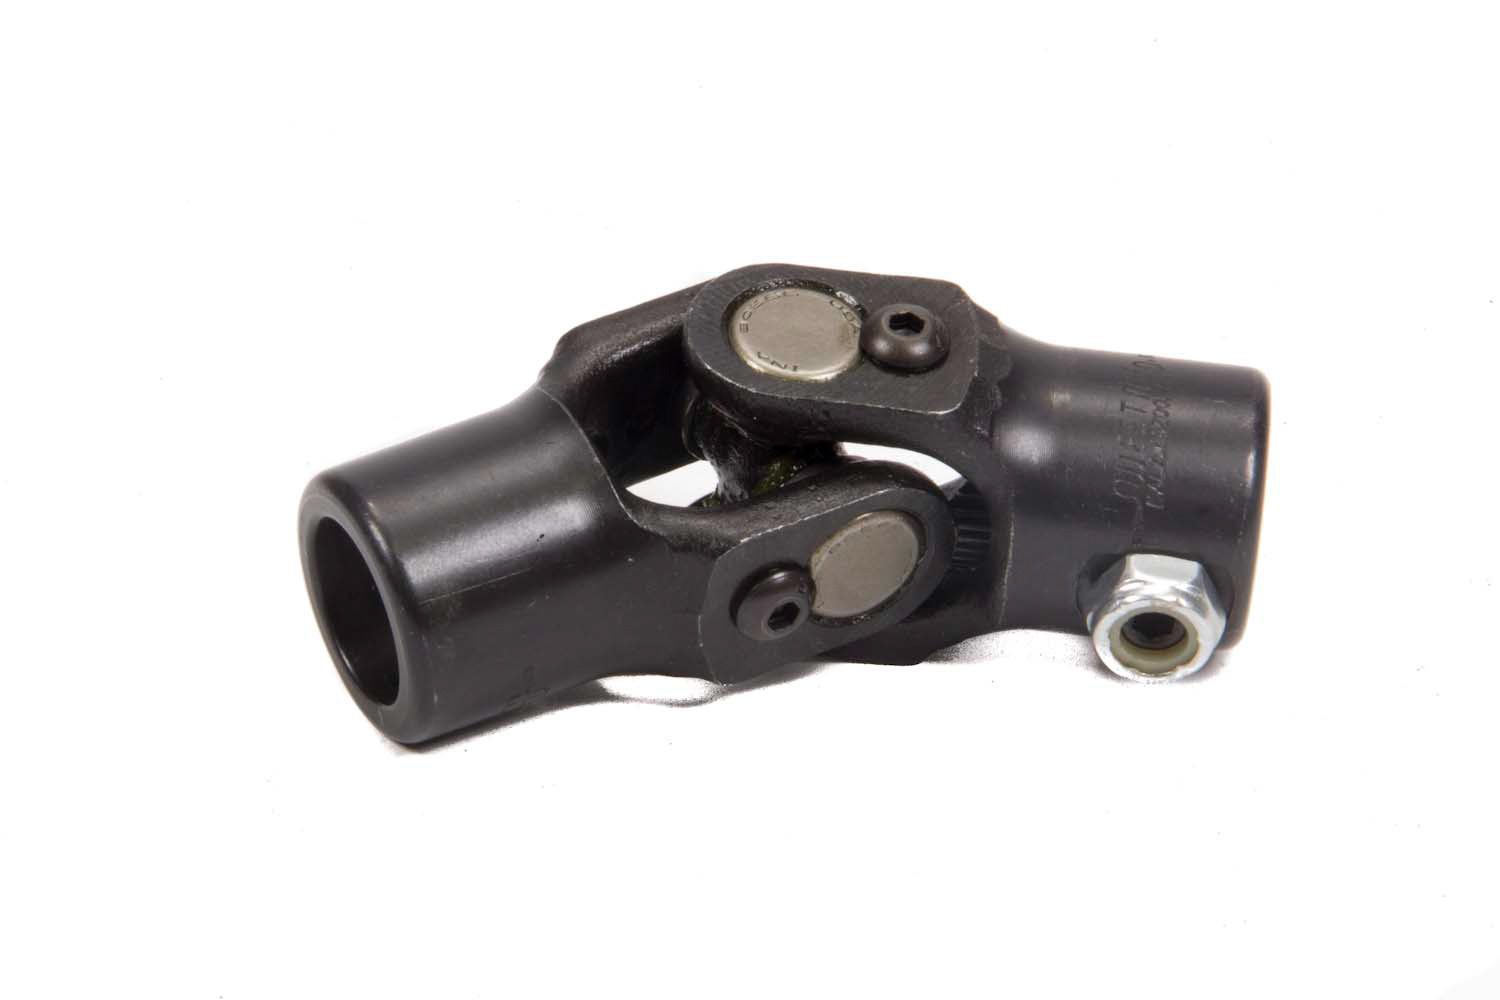 Sweet Manufacturing 401-50614 Steering Universal Joint, Single Joint, 3/4 in Smooth Bore to 5/8 in 36 Spline, Steel, Black Paint, Each